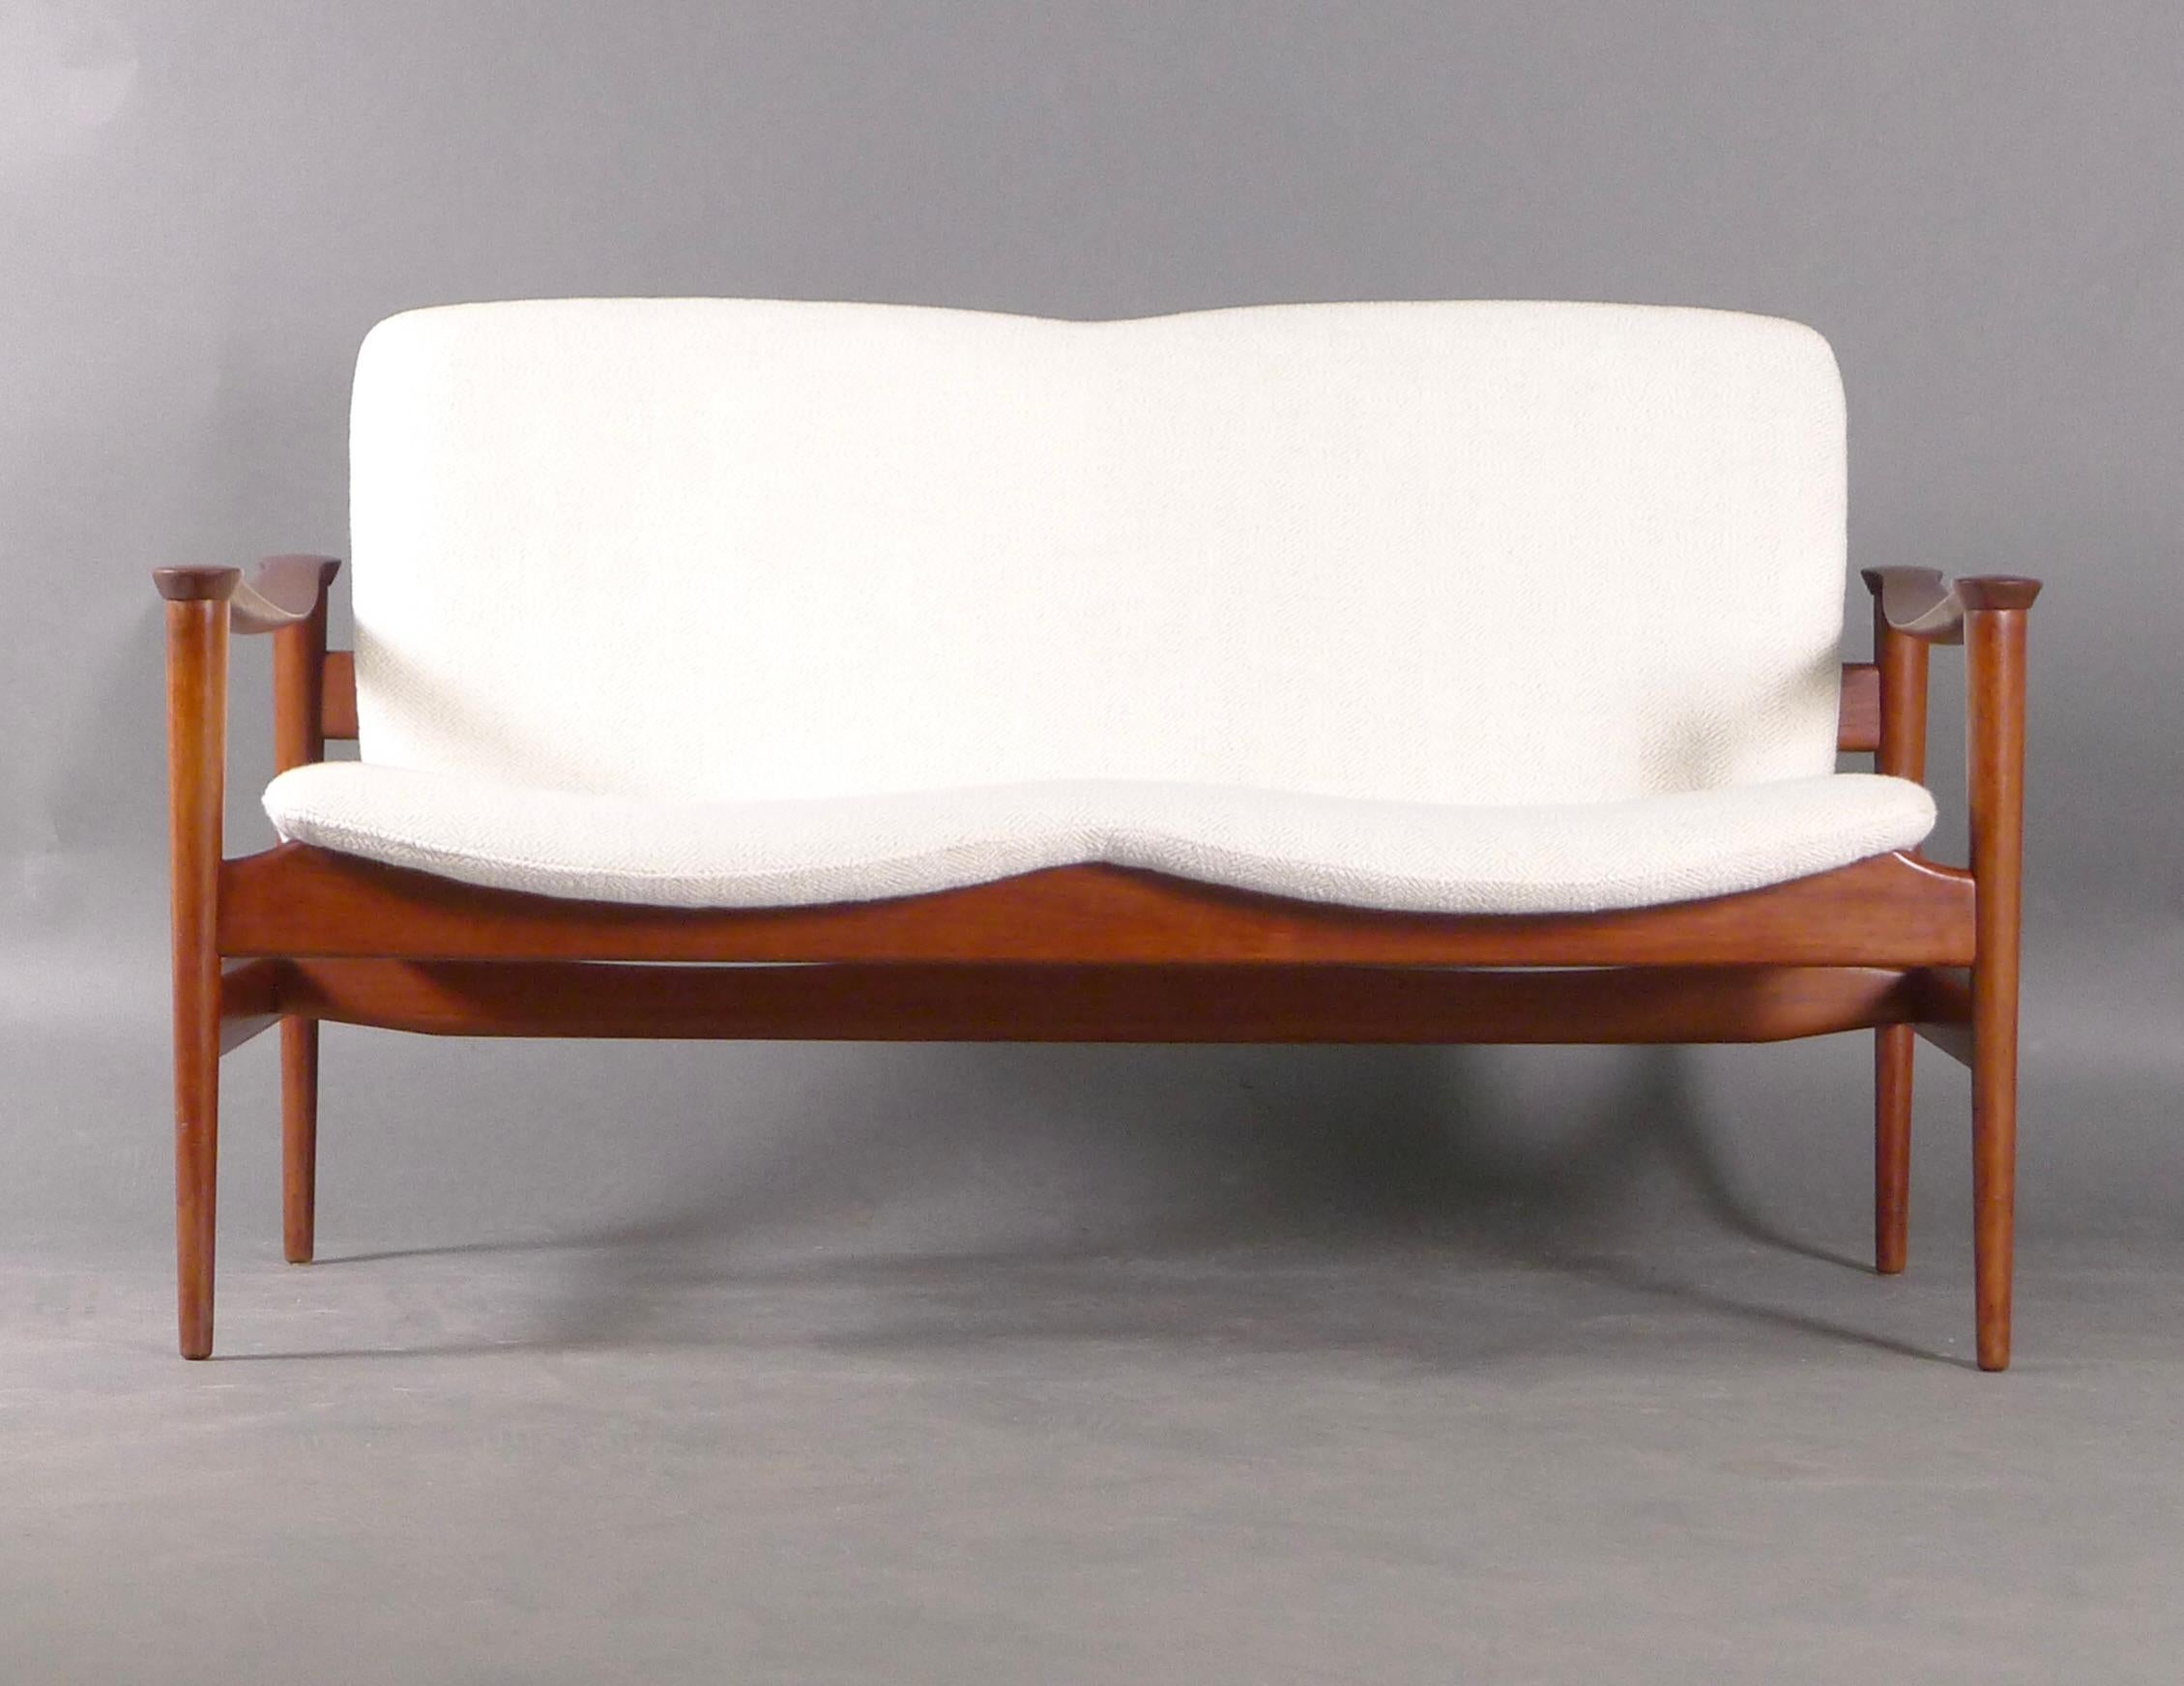 Beautiful Norwegian two-seater sofa or loveseat, model 711, designed by Fredrik A Kayser in 1960 and made by Vatne Lenestolfabrikk.  The teak frame has a lovely patina and features roundels to the shaped armrests.  The sofa has been newly